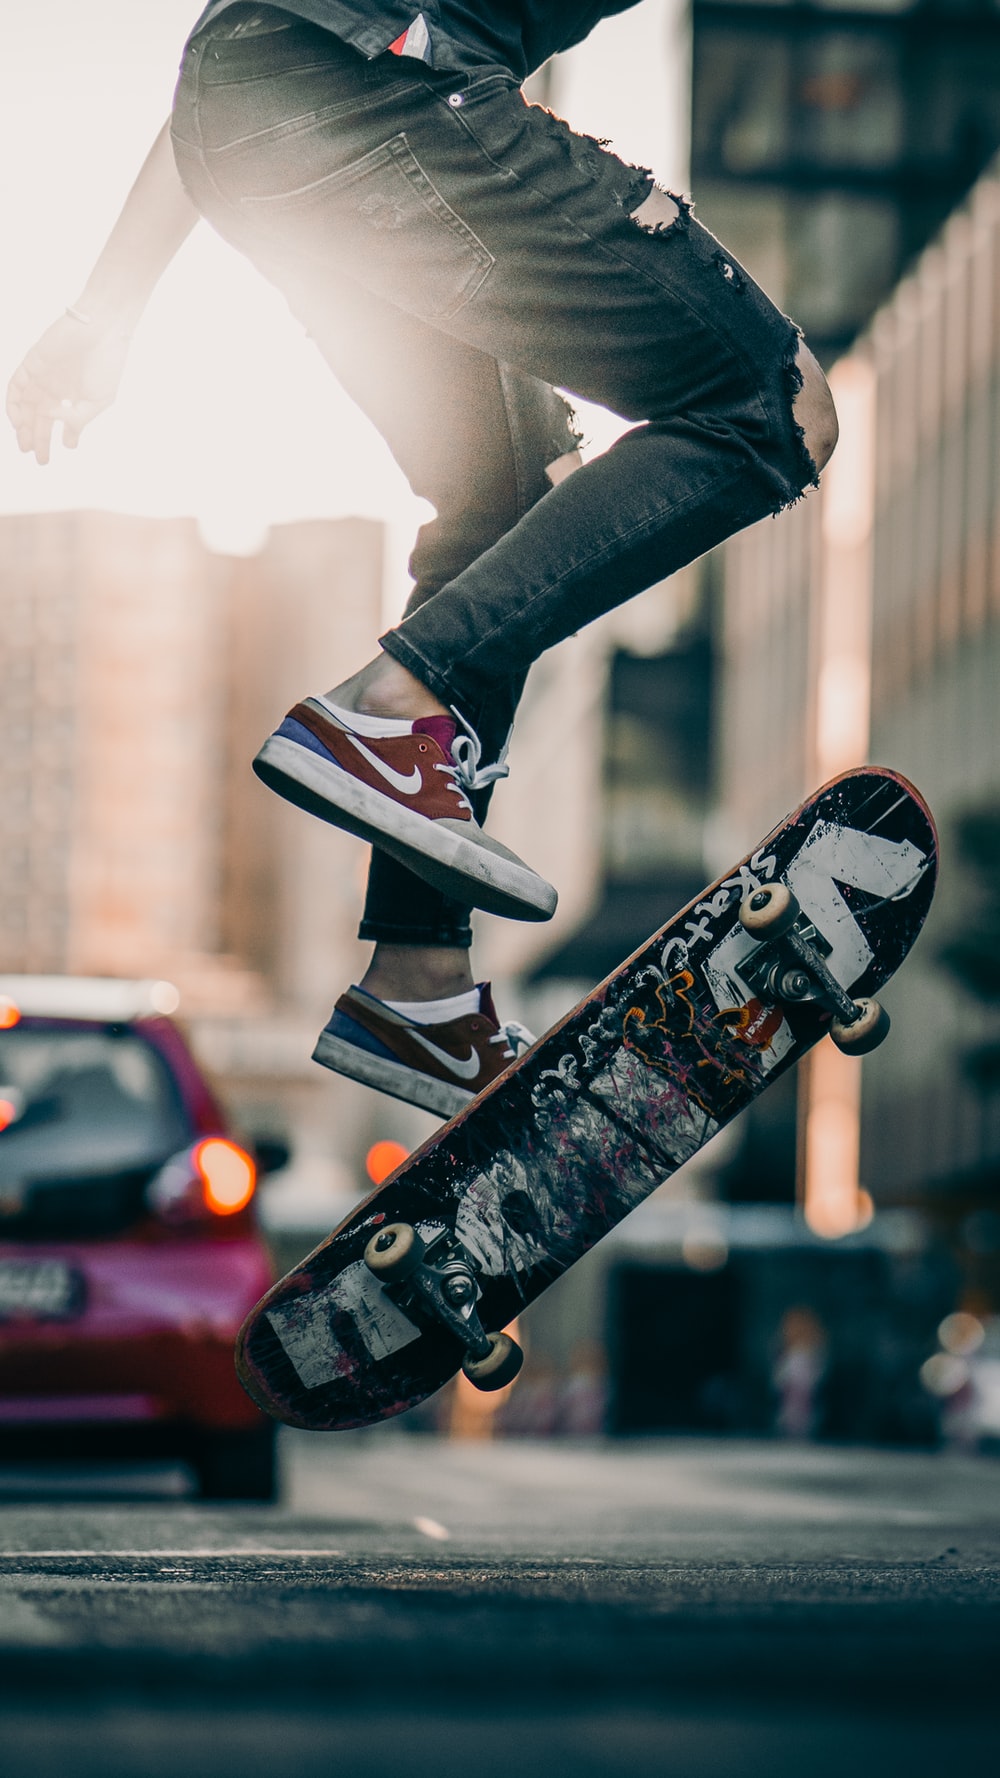 free-download-skateboard-wallpapers-free-hd-download-500-hq